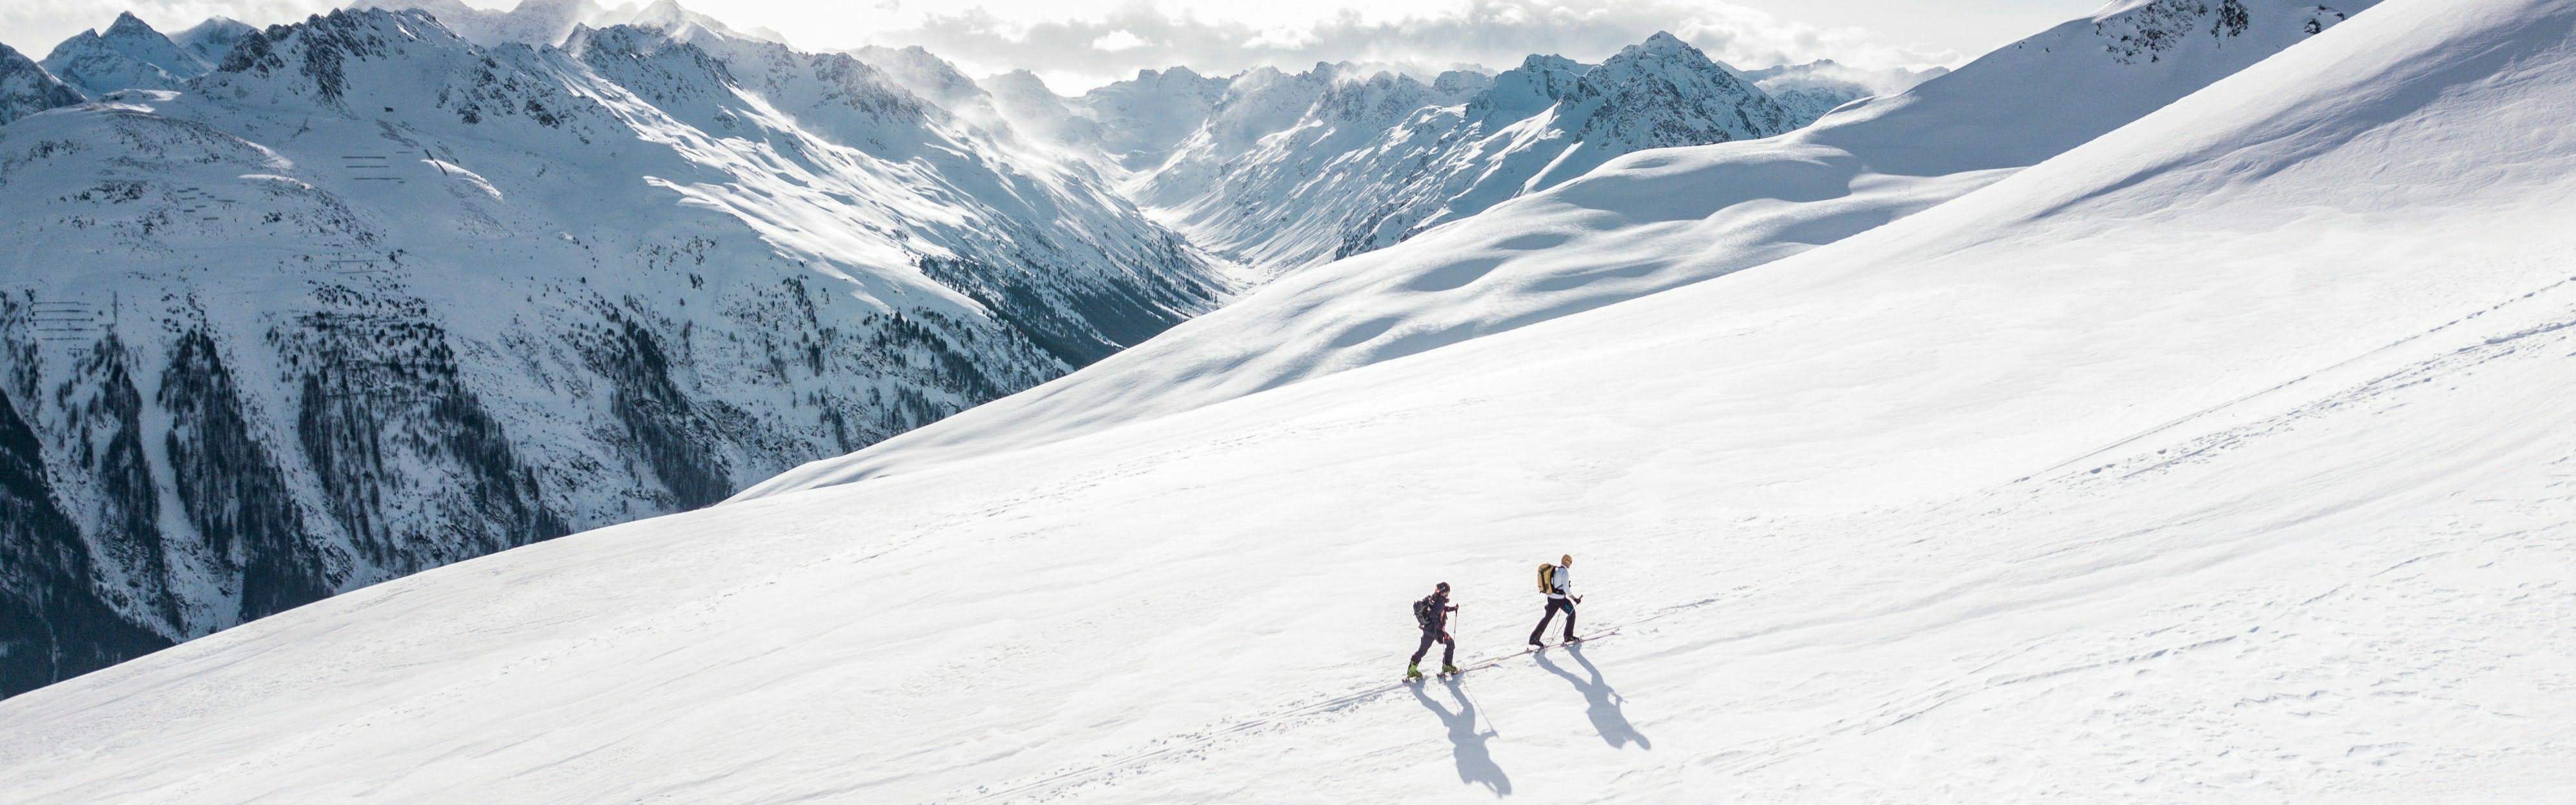 Two skiers walking up a very snowy hill on skis. There are many snowy mountains in the background.